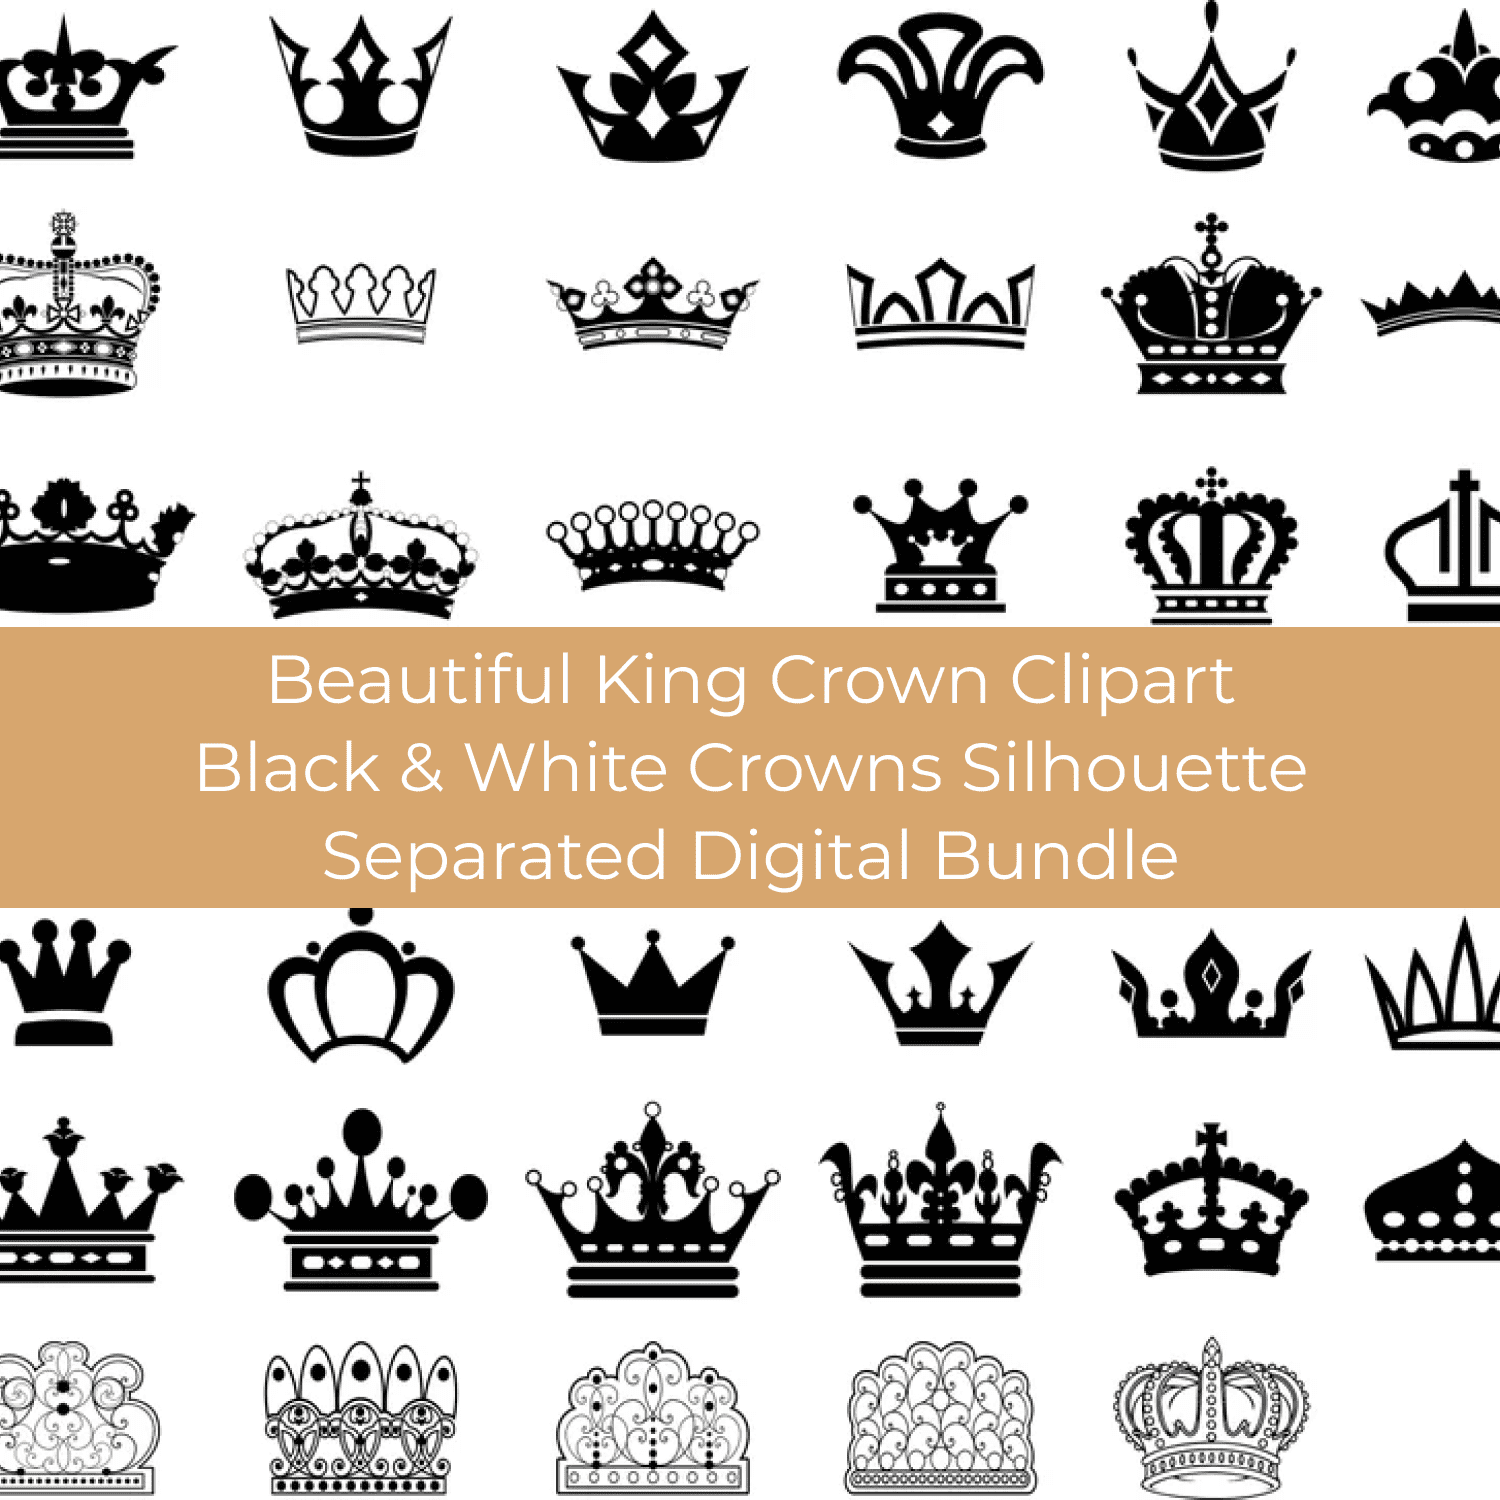 Black & White Crowns Silhouette SVG image.